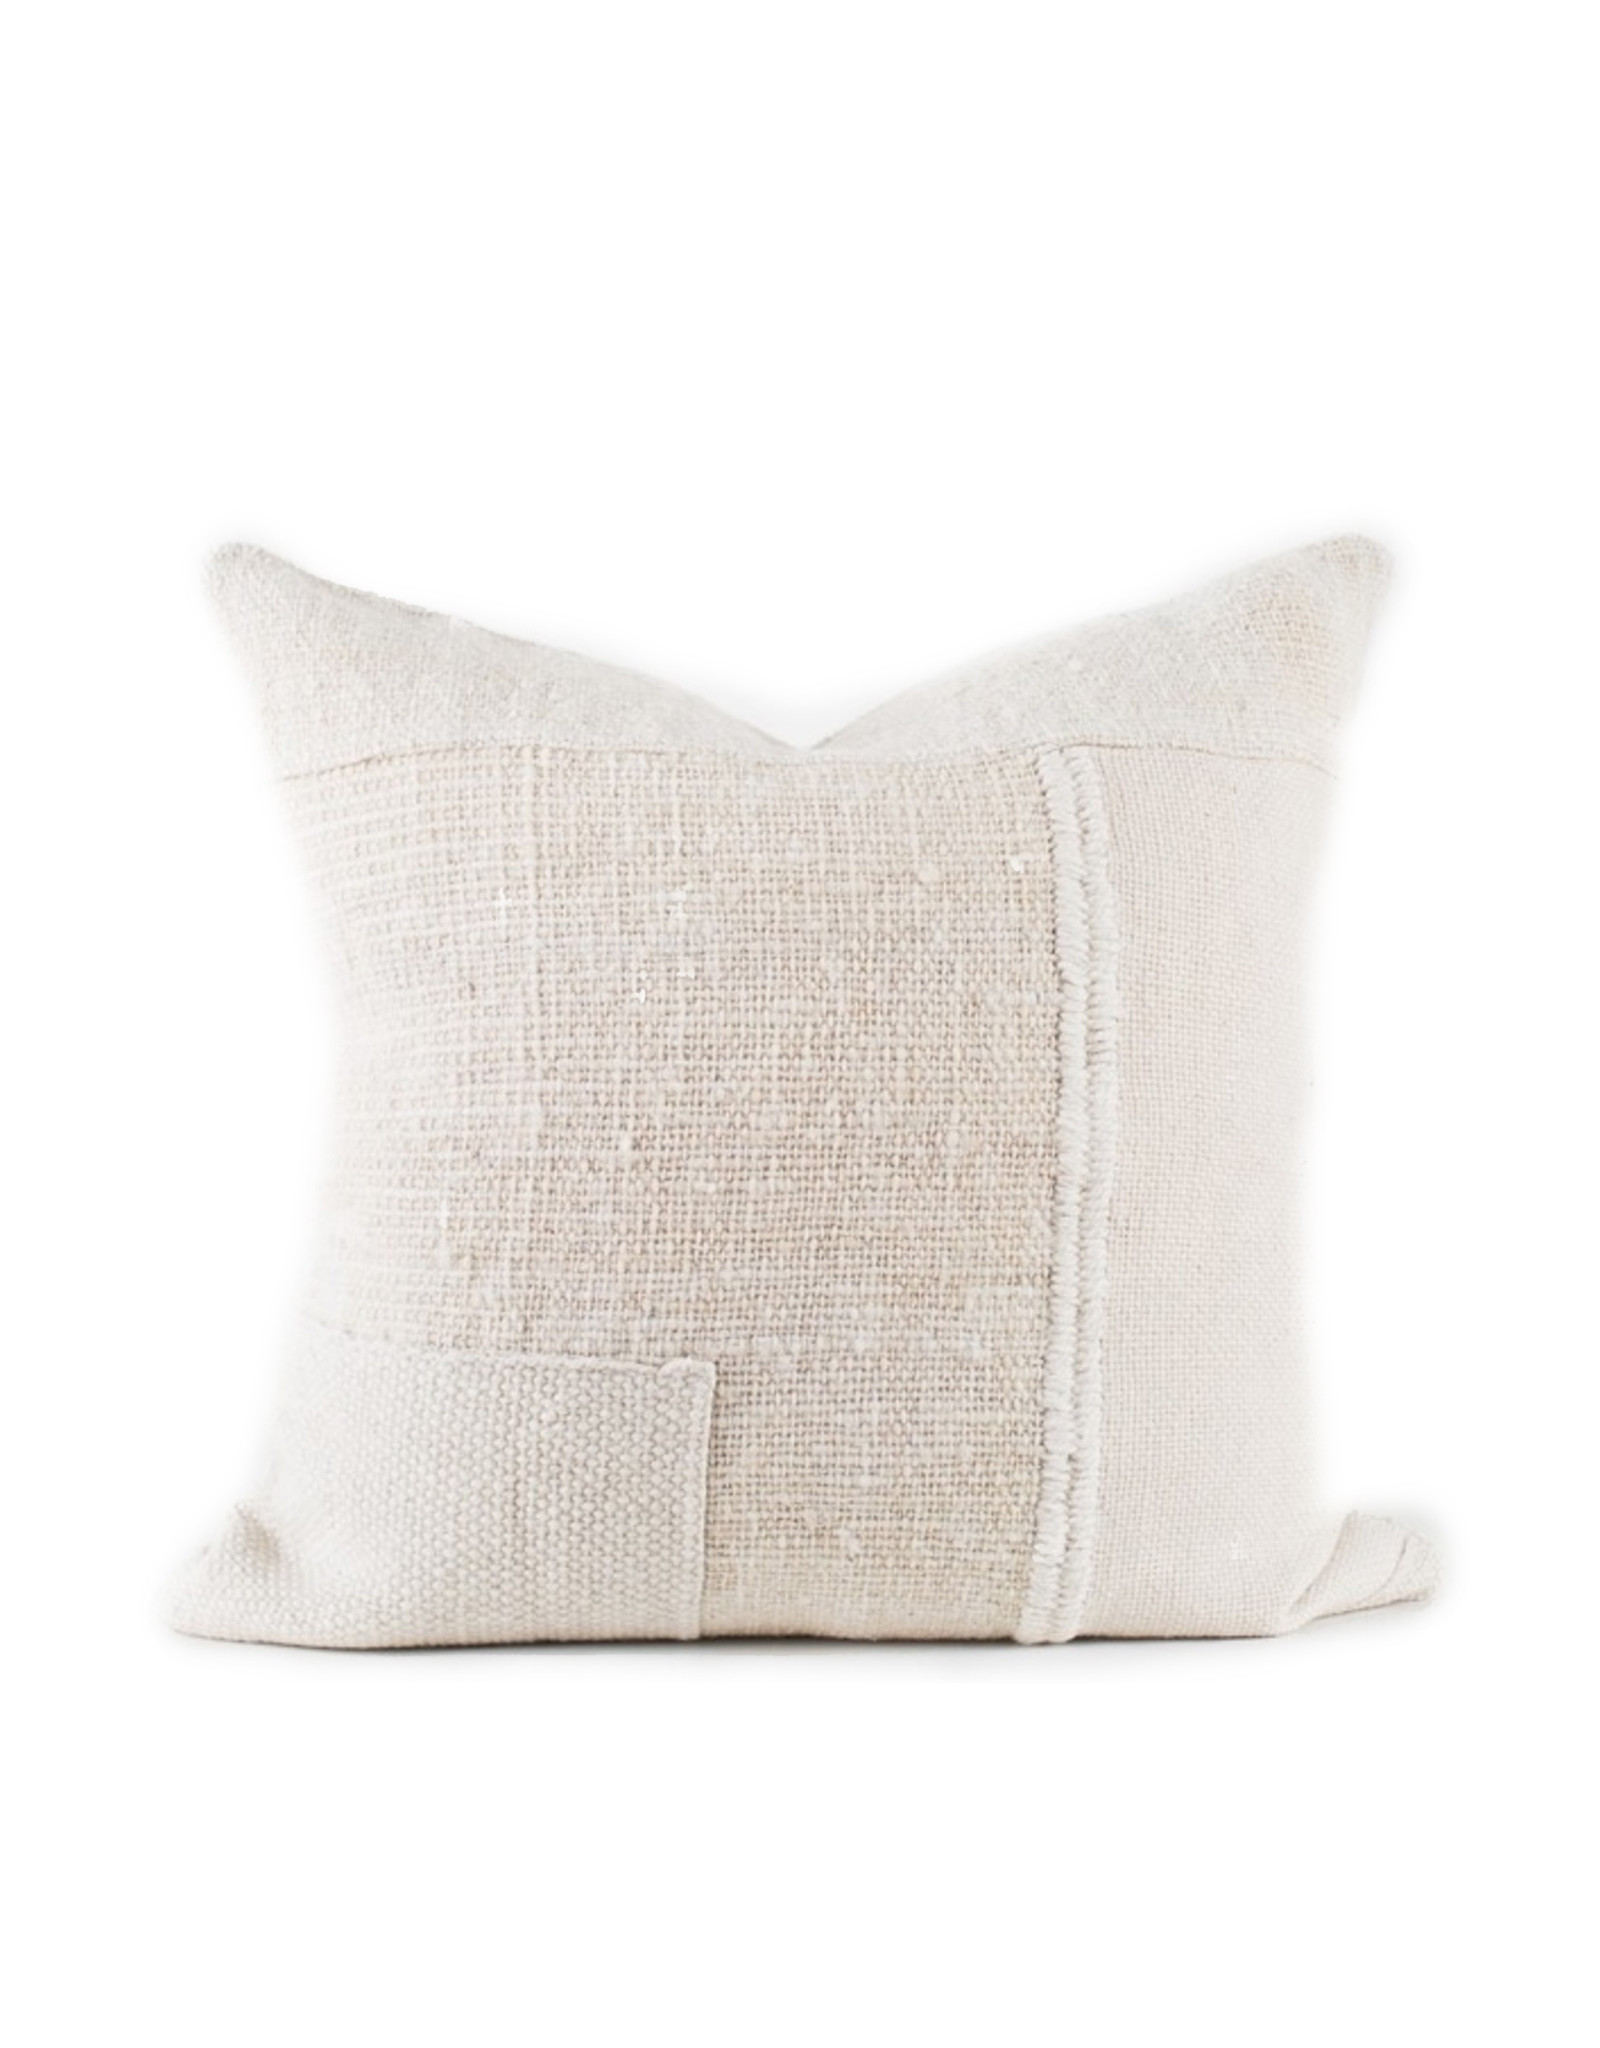 Patches White Pillow, Chile  26x26